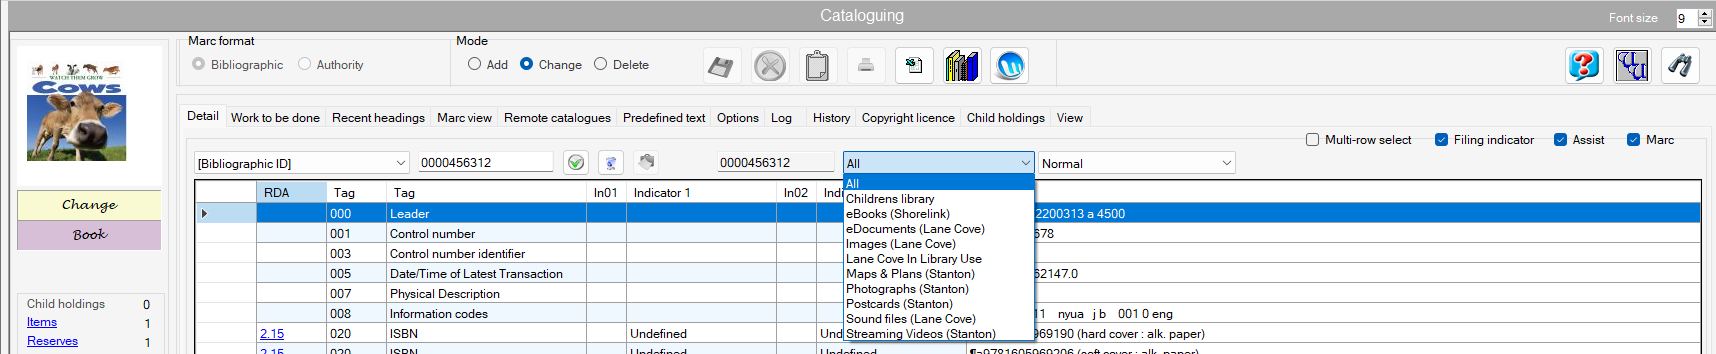 Cataloguing screen - Bibliographic - change - Database subset dropdown